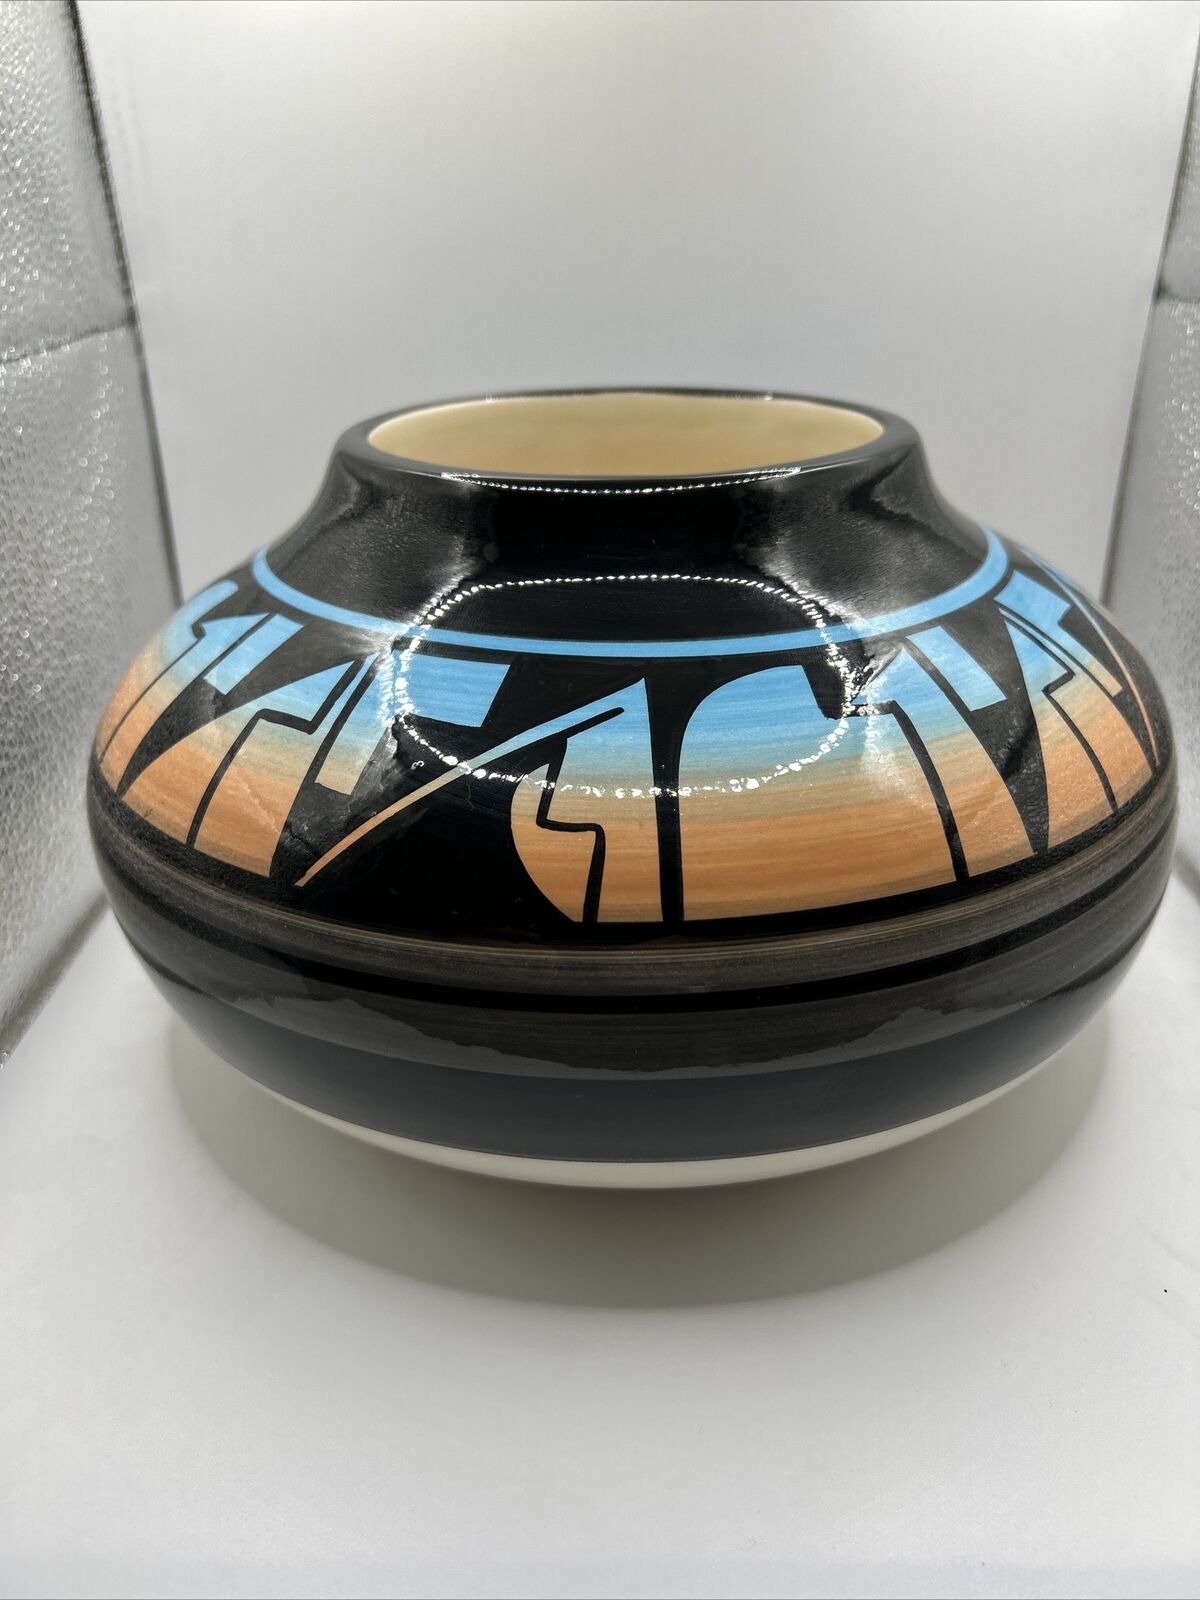 Tribe Pottery Glazed Bowl Signed by Ruth Root #19 Southwestern Deco Blue UTE MTN